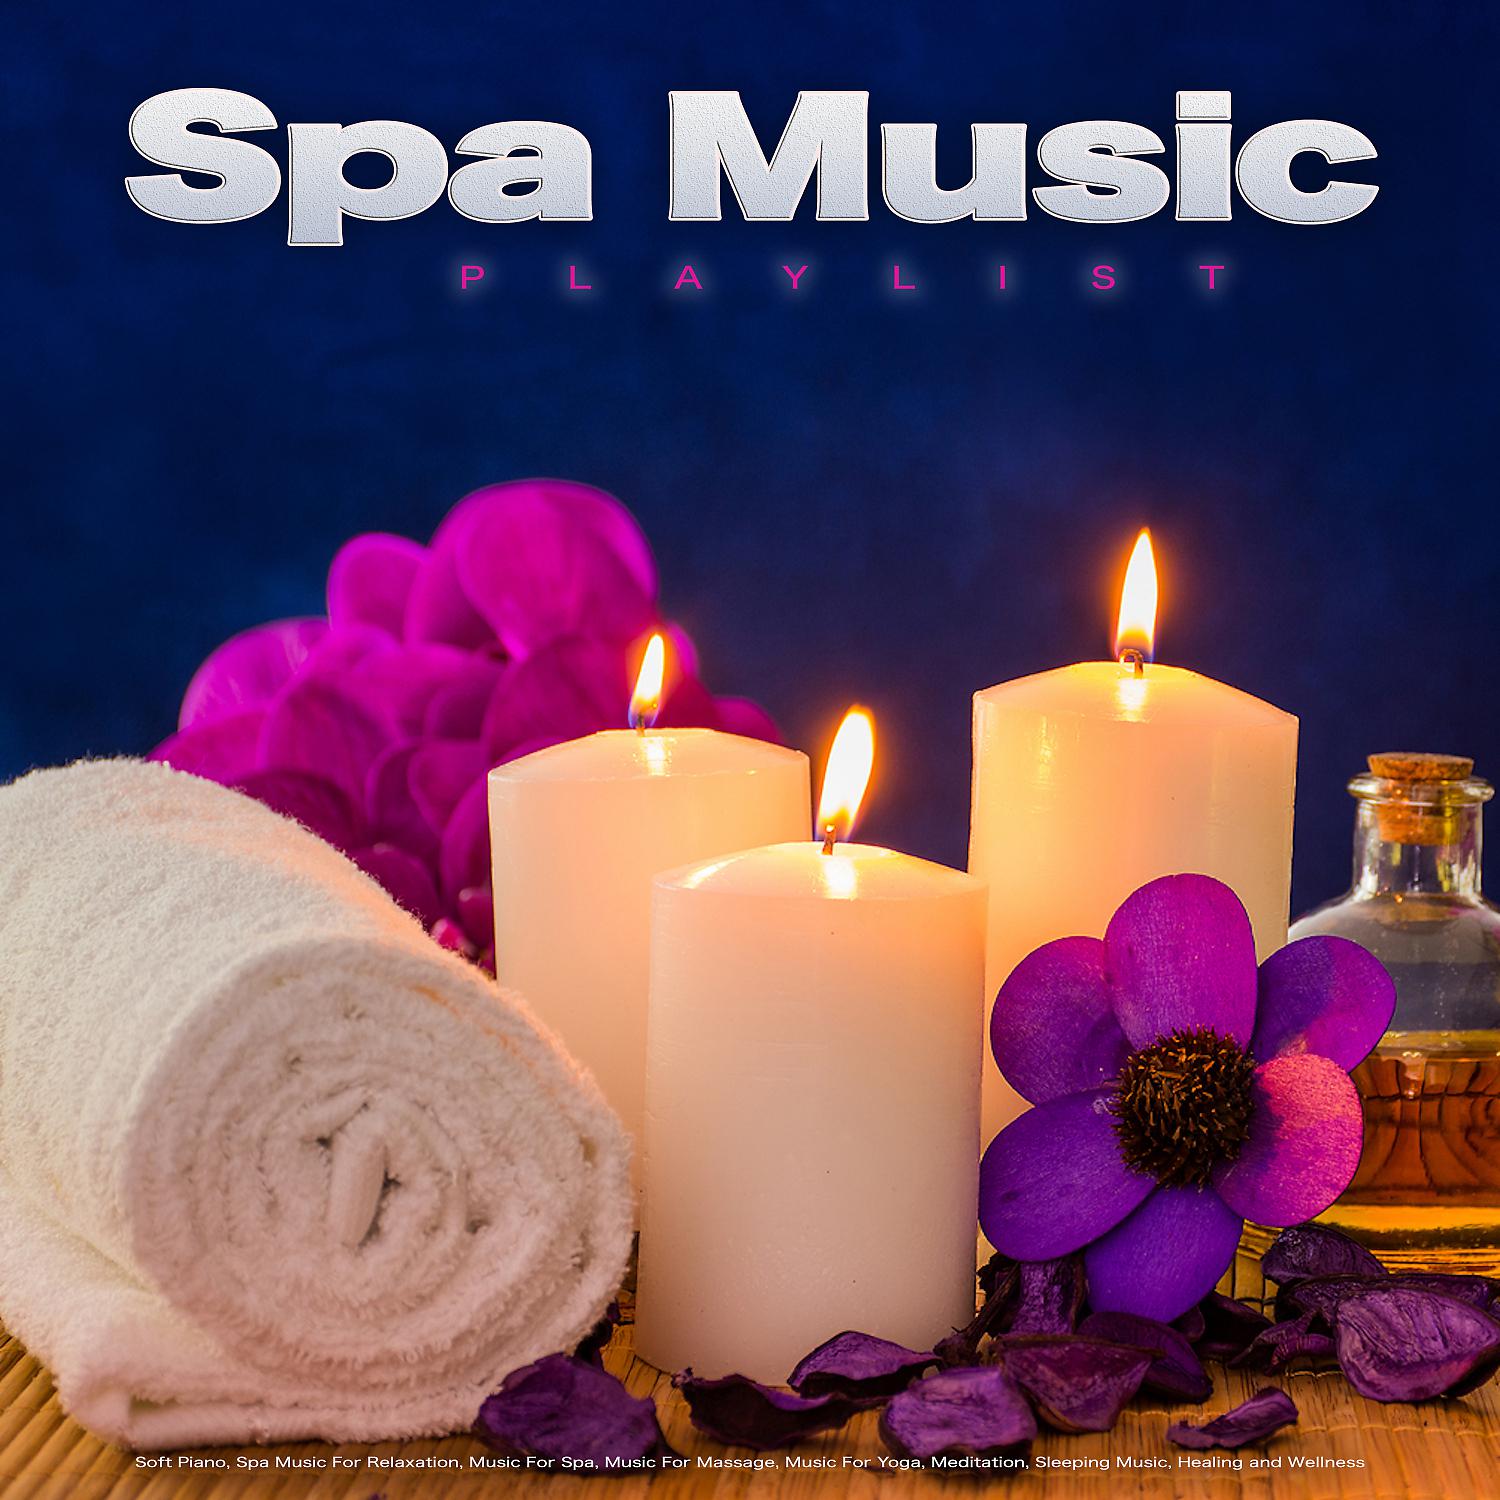 Постер альбома Spa Music Playlist: Soft Piano, Spa Music For Relaxation, Music For Spa, Music For Massage, Music For Yoga, Meditation, Sleeping Music, Healing and Wellness